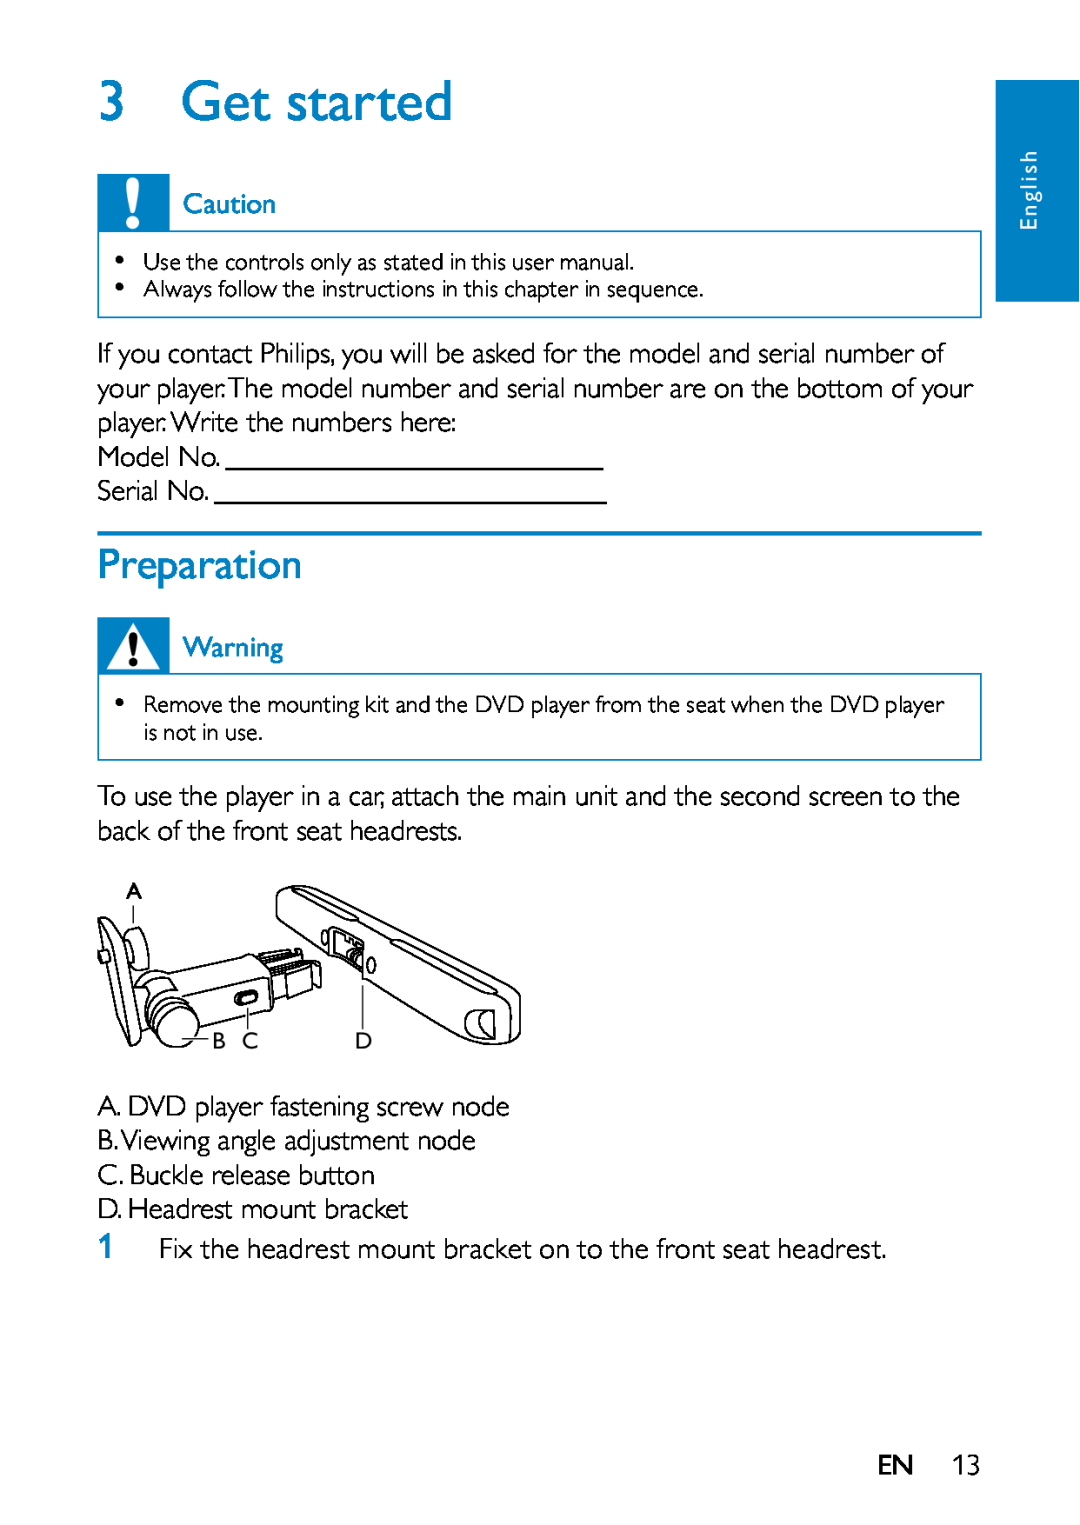 Philips PD7013/79 user manual Get started, Preparation 